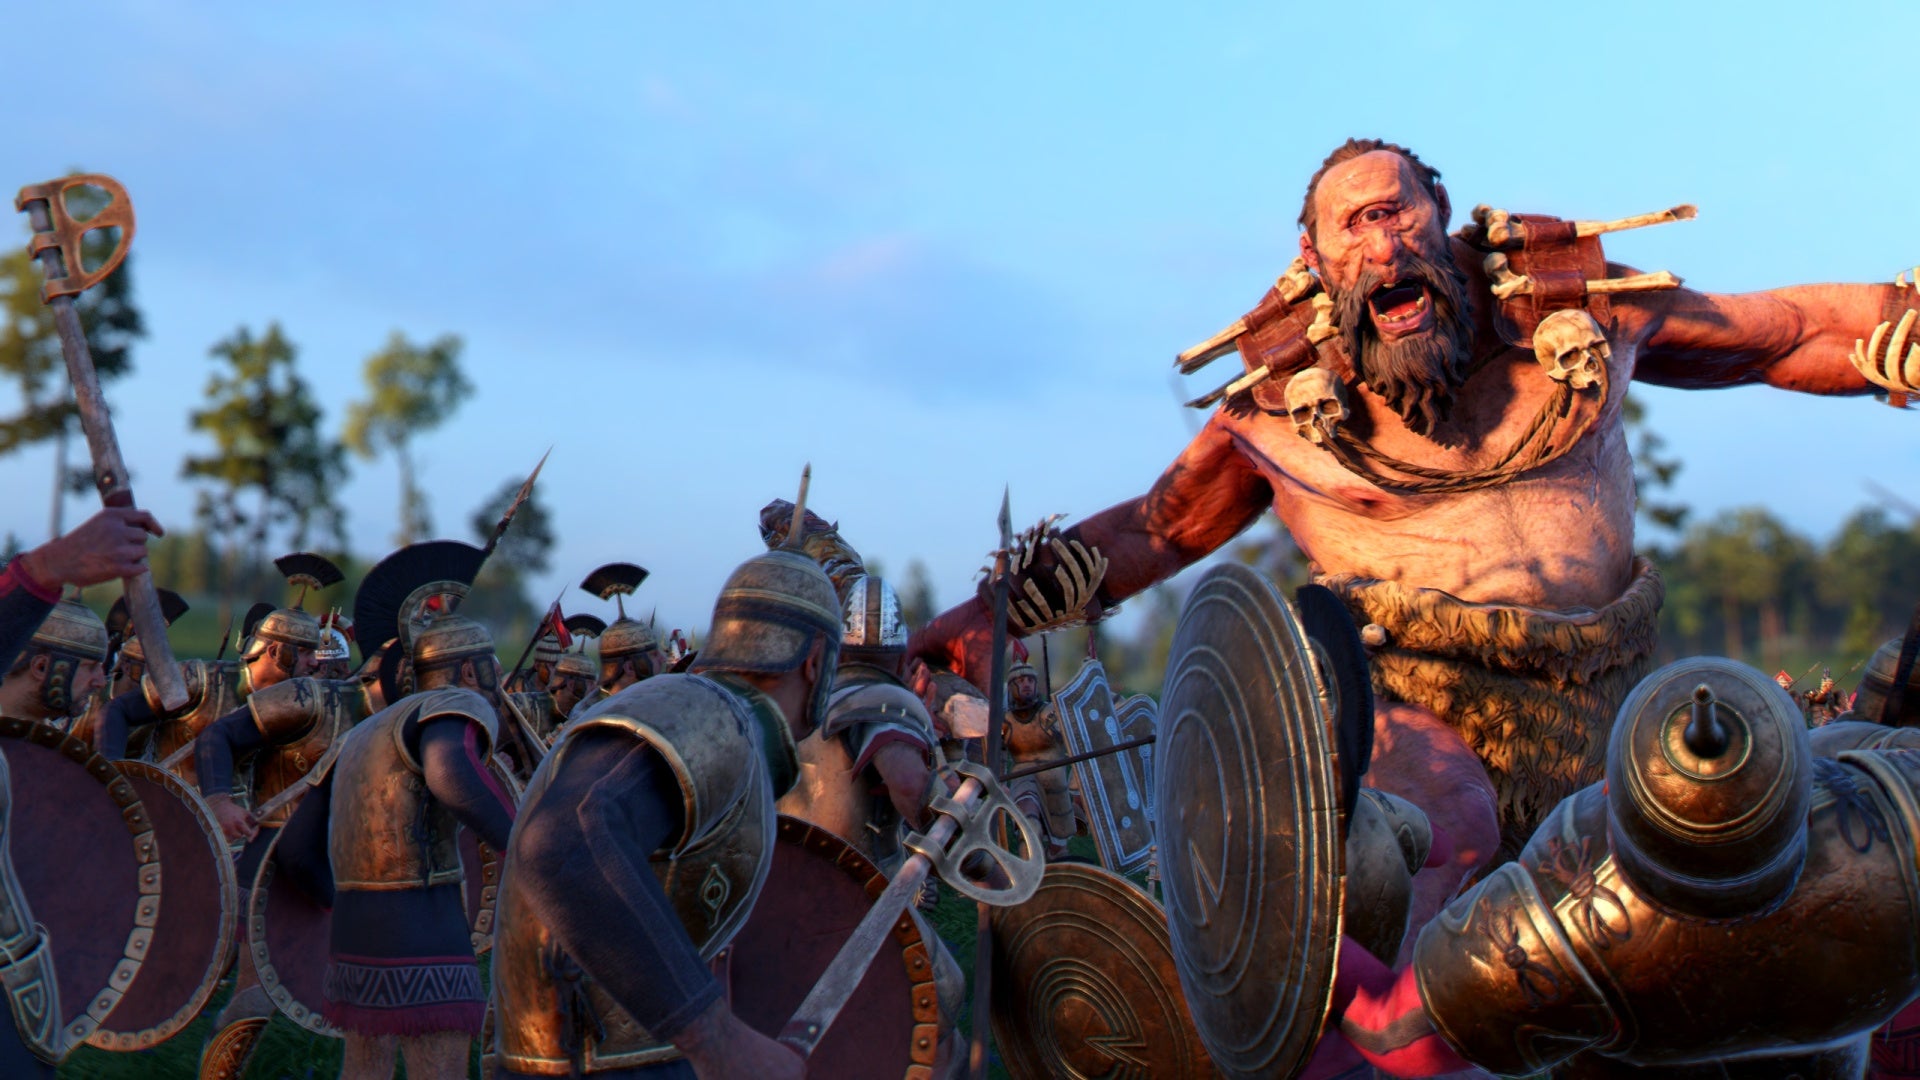 A screenshot of A Total War Saga: Troy's Mythos expansion, featuring an actual factual cyclops on the battlefield.